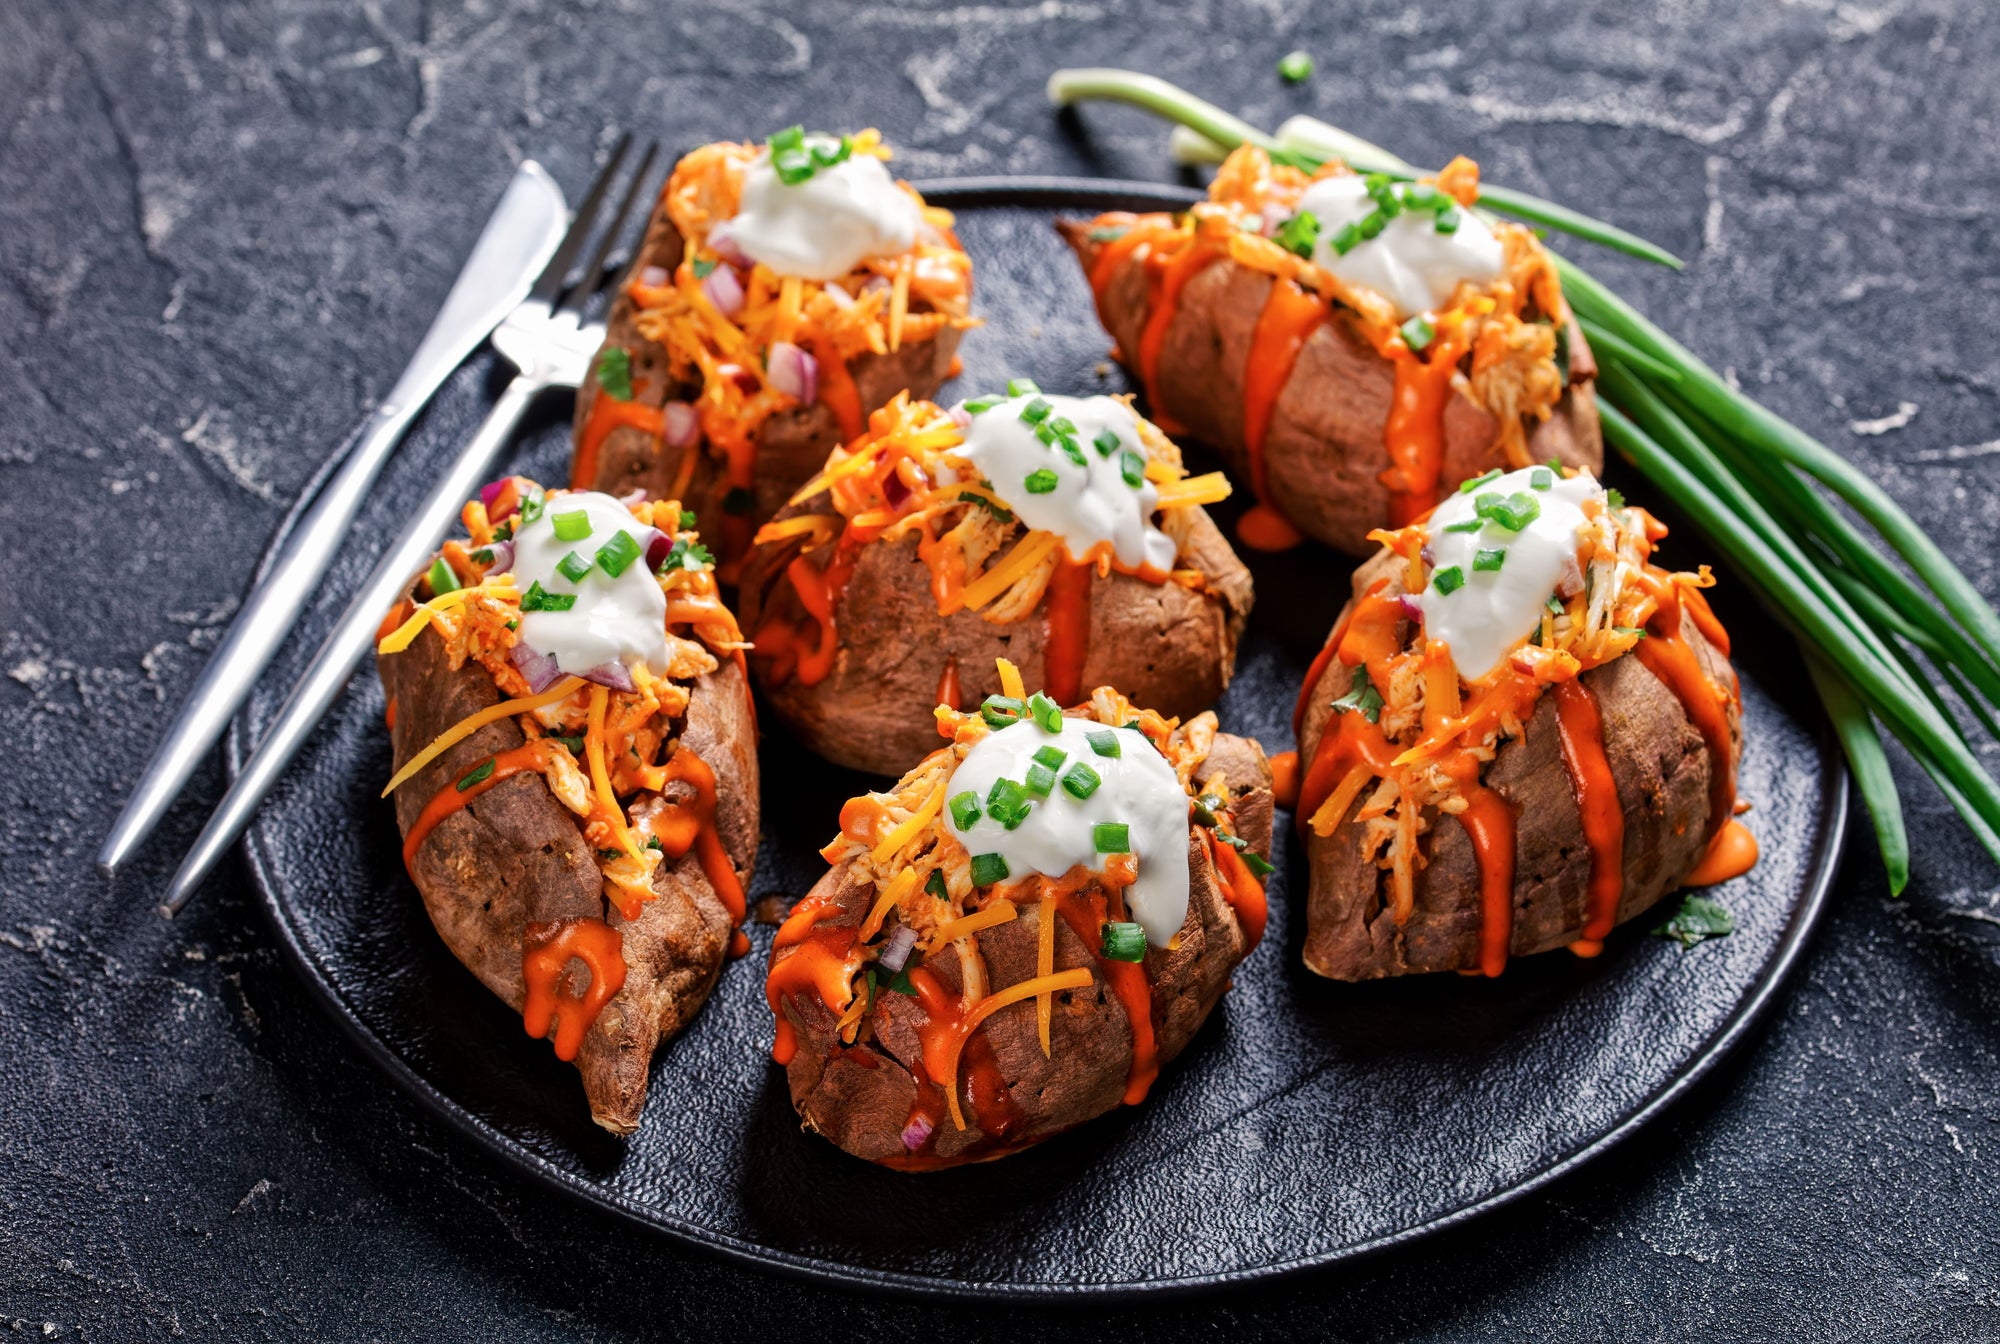 Baked Buffalo Chicken Sweet Potatoes with Rougarou Wing Sauce